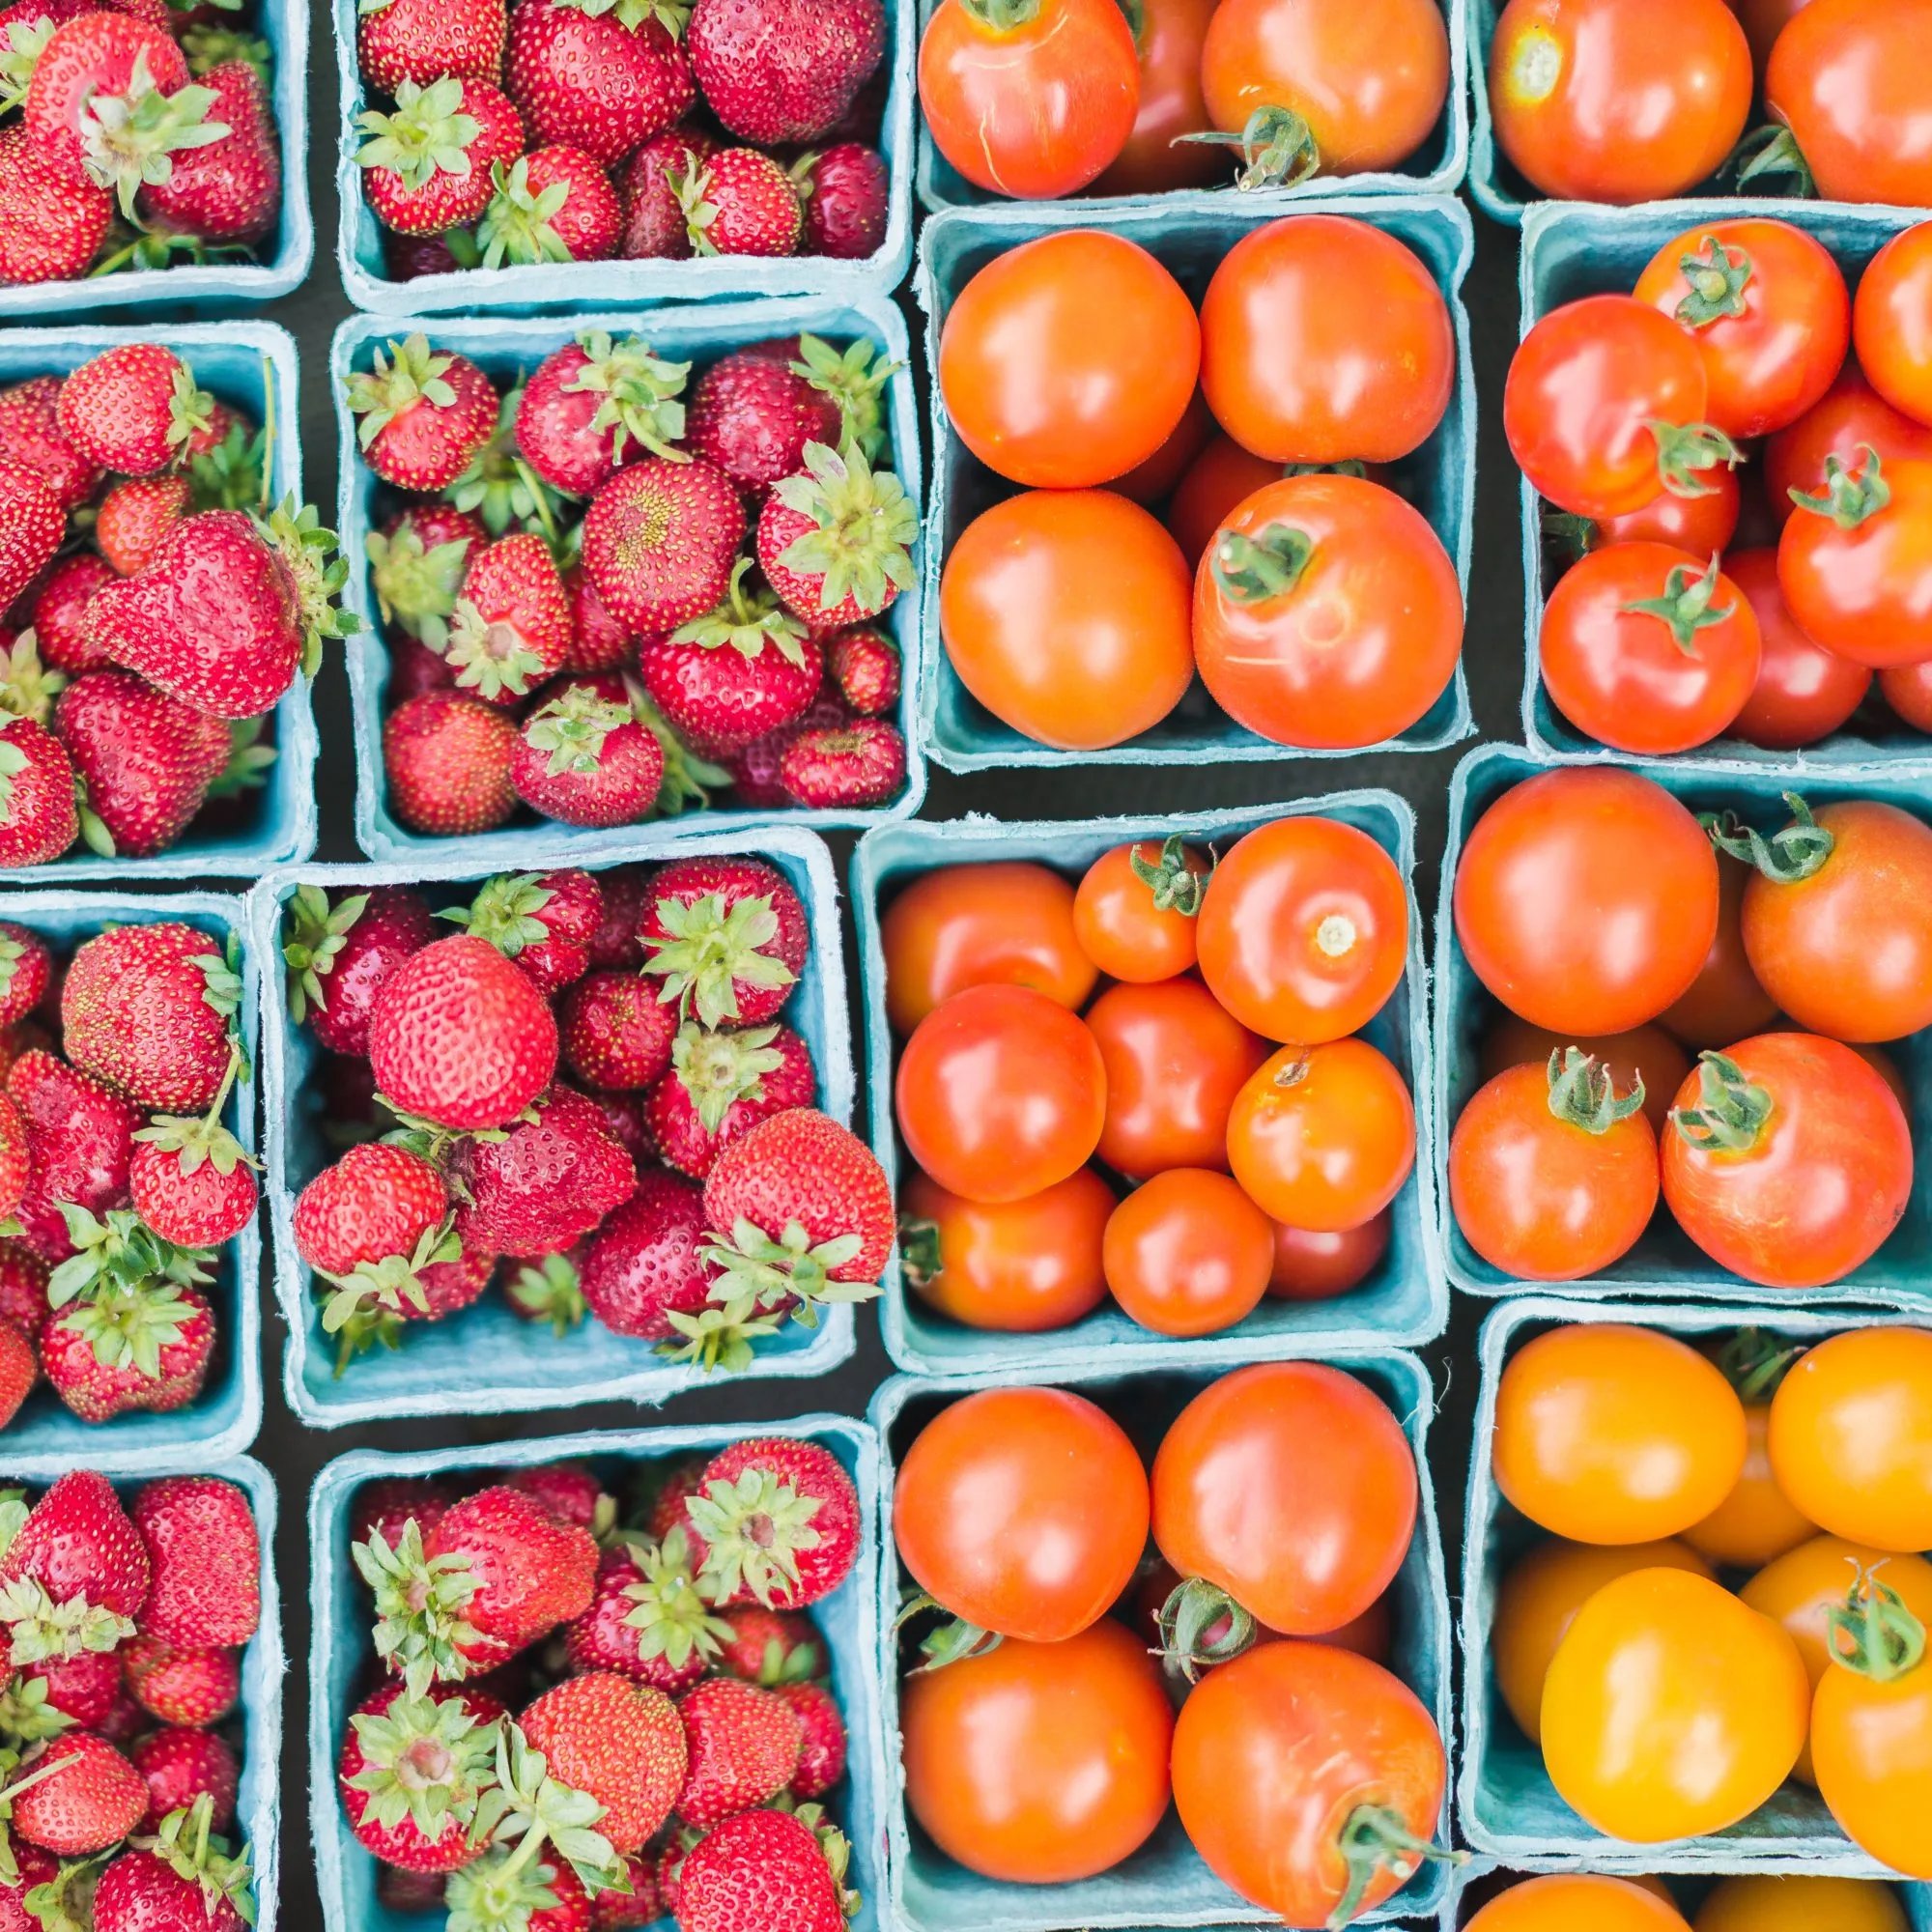 2019 Dirty Dozen List: Which Produce Has The Most Pesticides?